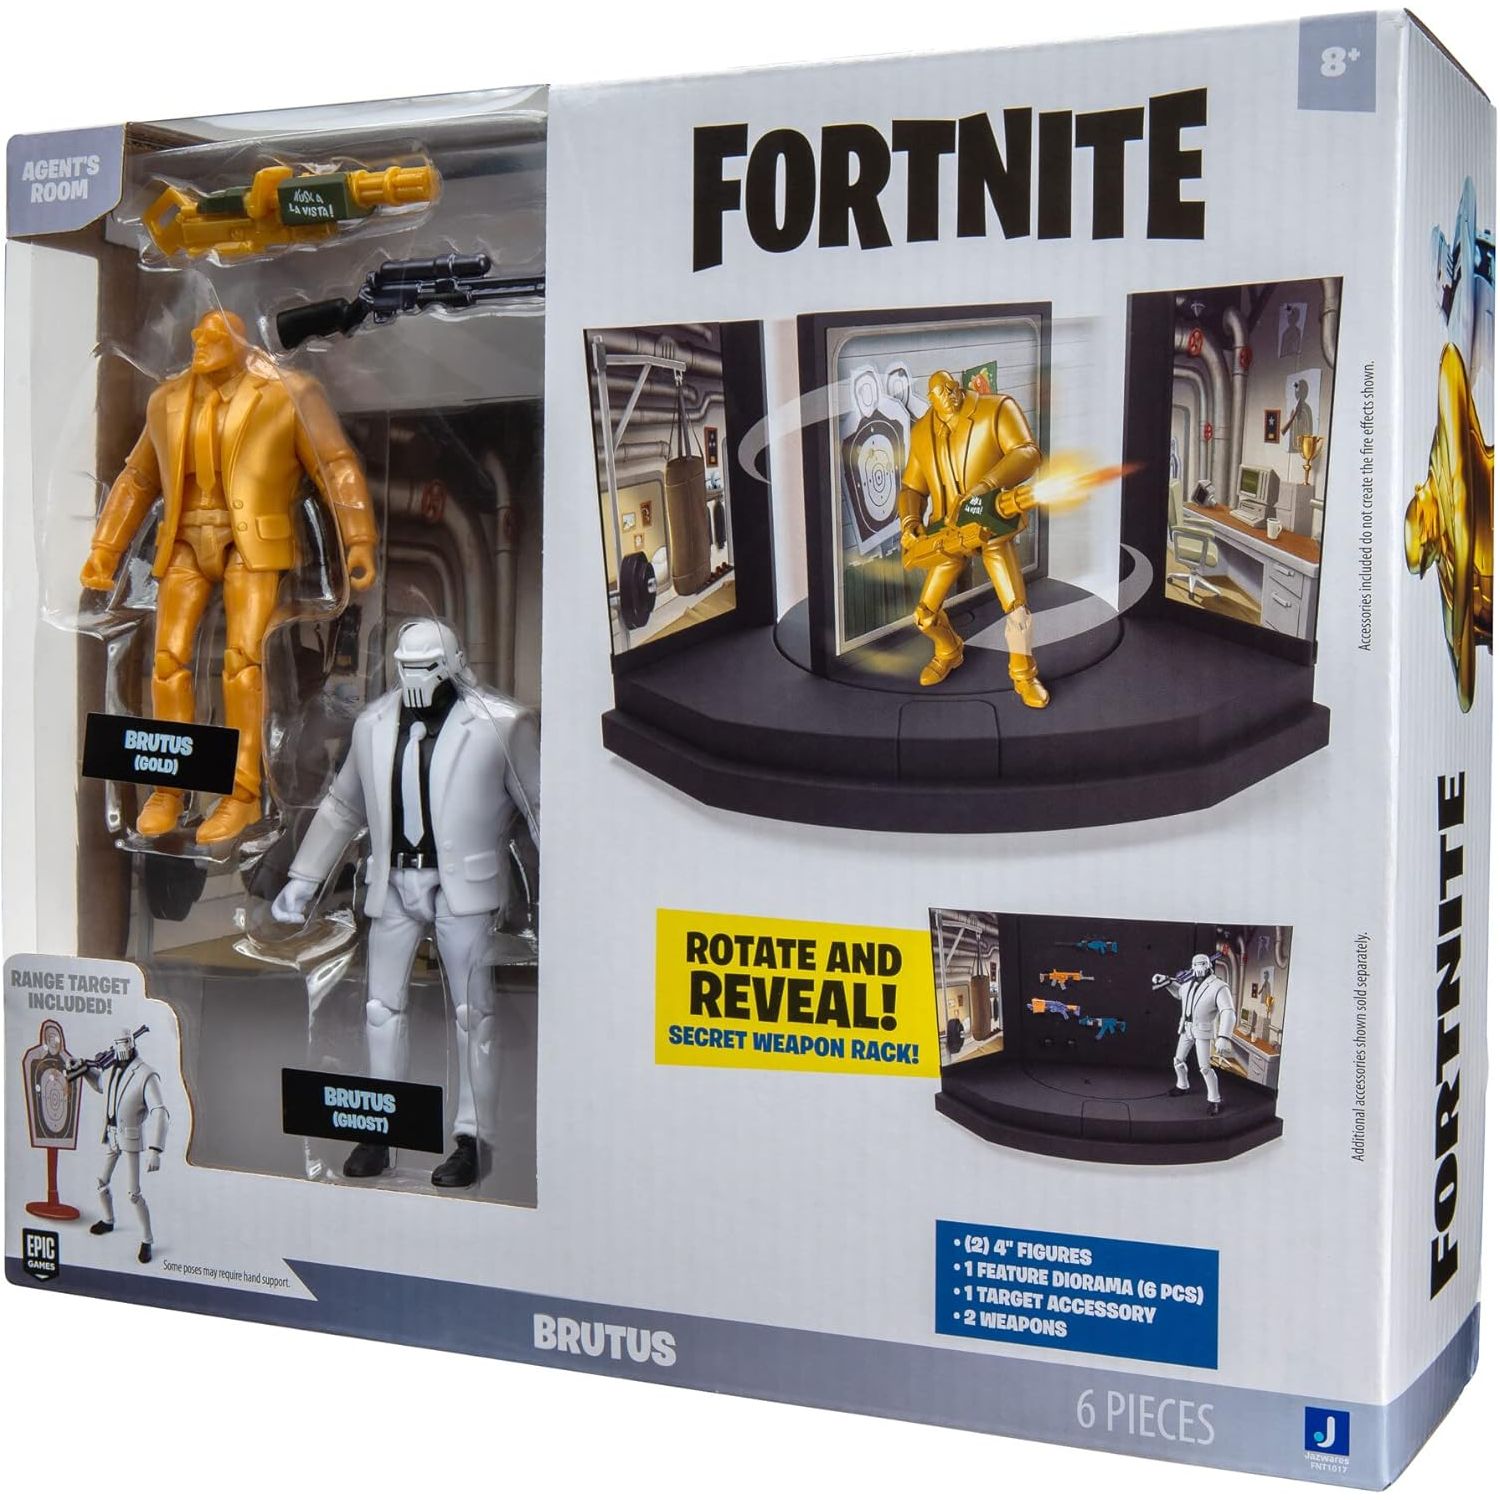 Fortnite Brutus Agent’s Room Featured Playset with Two 4-inch Articulated Figures Plus Weapons and Accessories